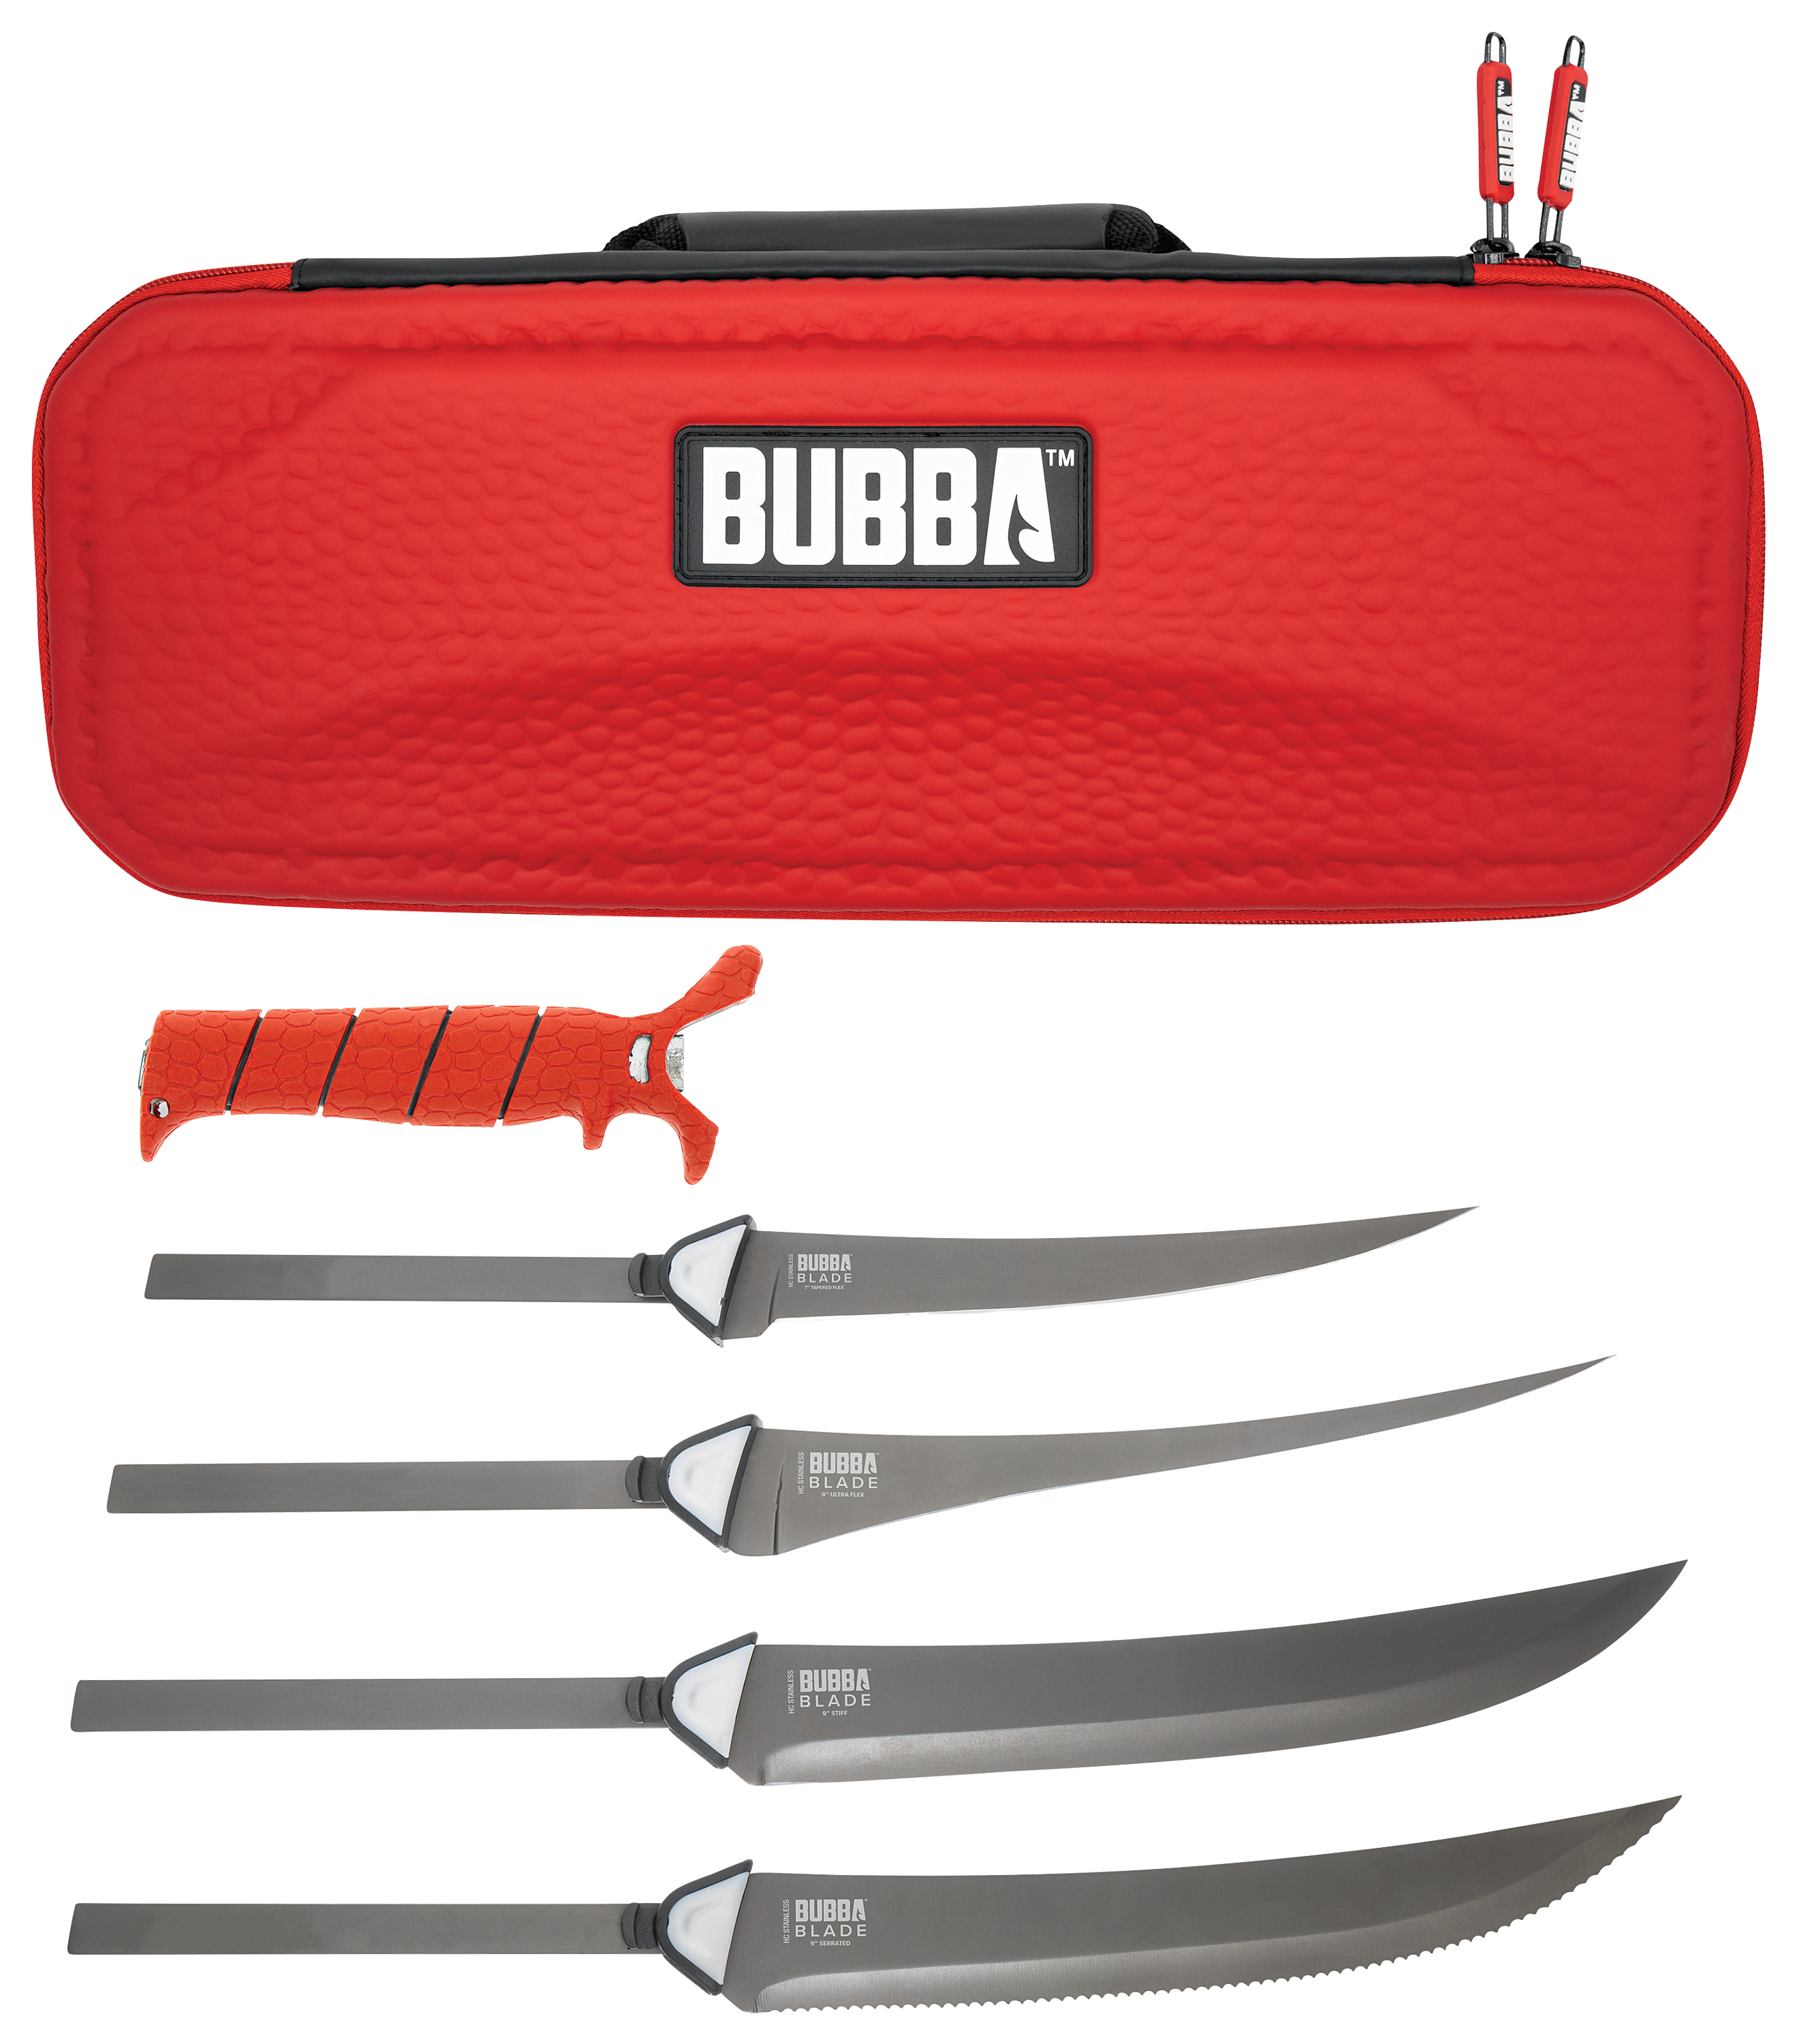 Bubba Interchangeable Blade System